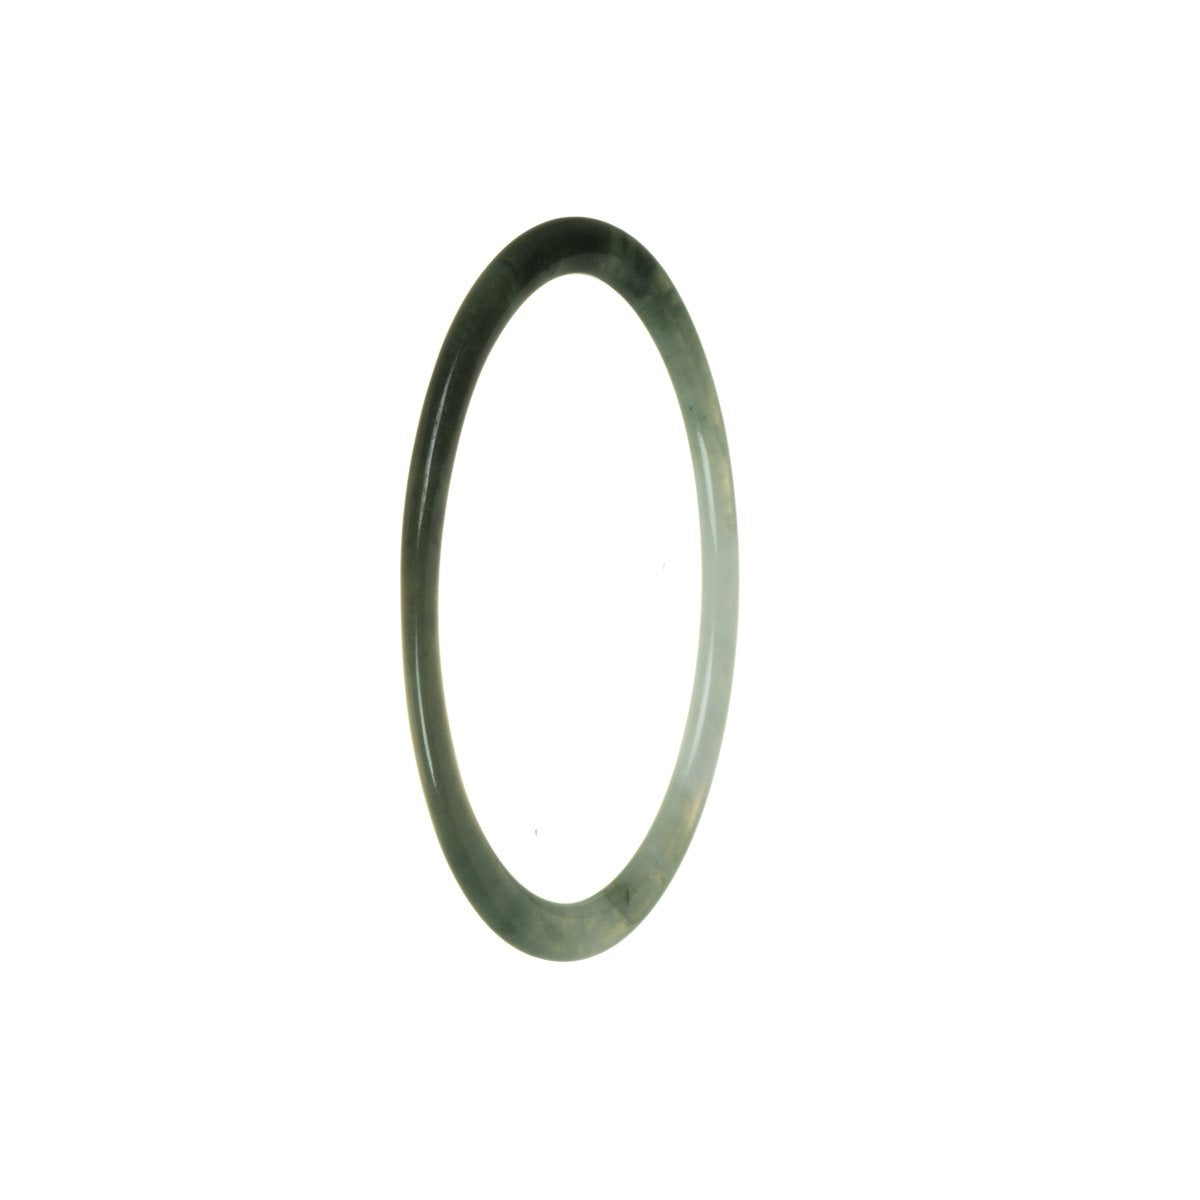 A close-up image of a thin jade bangle, featuring a deep green color with white accents. The bangle is made from genuine Grade A Burmese jade and has a diameter of 60mm. Perfect for adding a touch of elegance to any outfit.